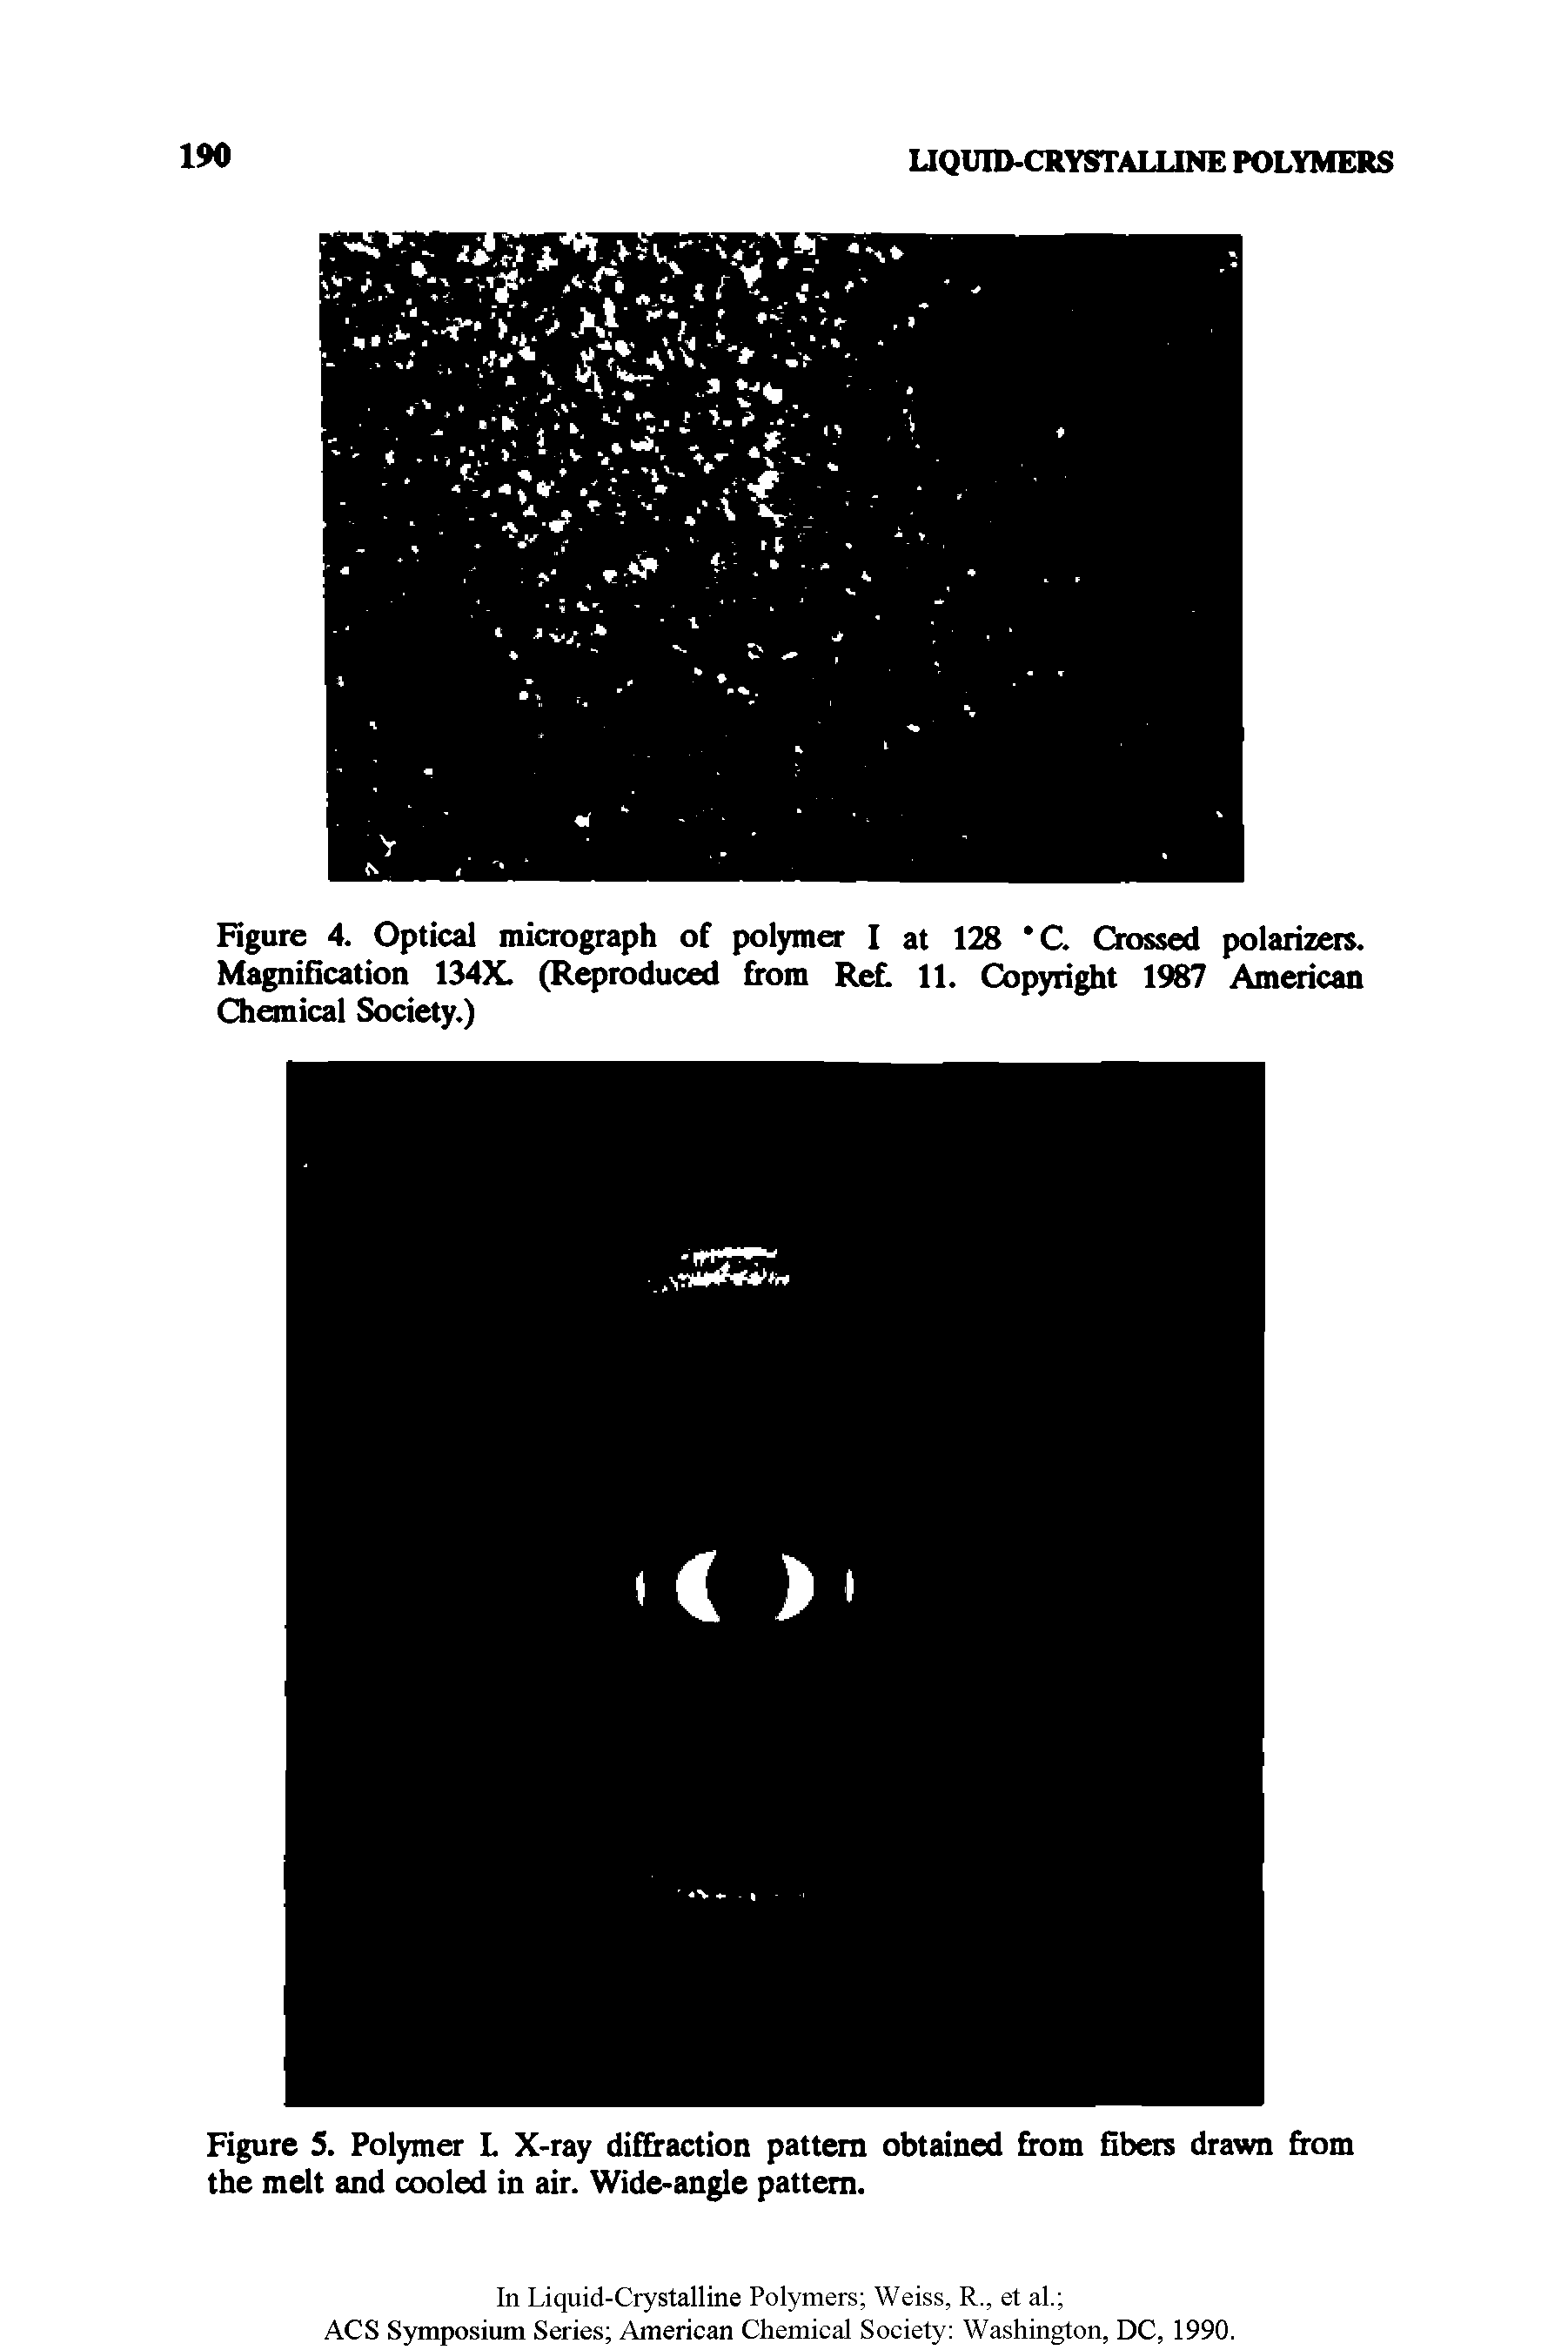 Figure 4. Optical micrograph of polymer I at 128 C. Crossed polarizers. Magnification 134X. (Reproduced from Ref. 11. Copyright 1987 American Chemical Society.)...